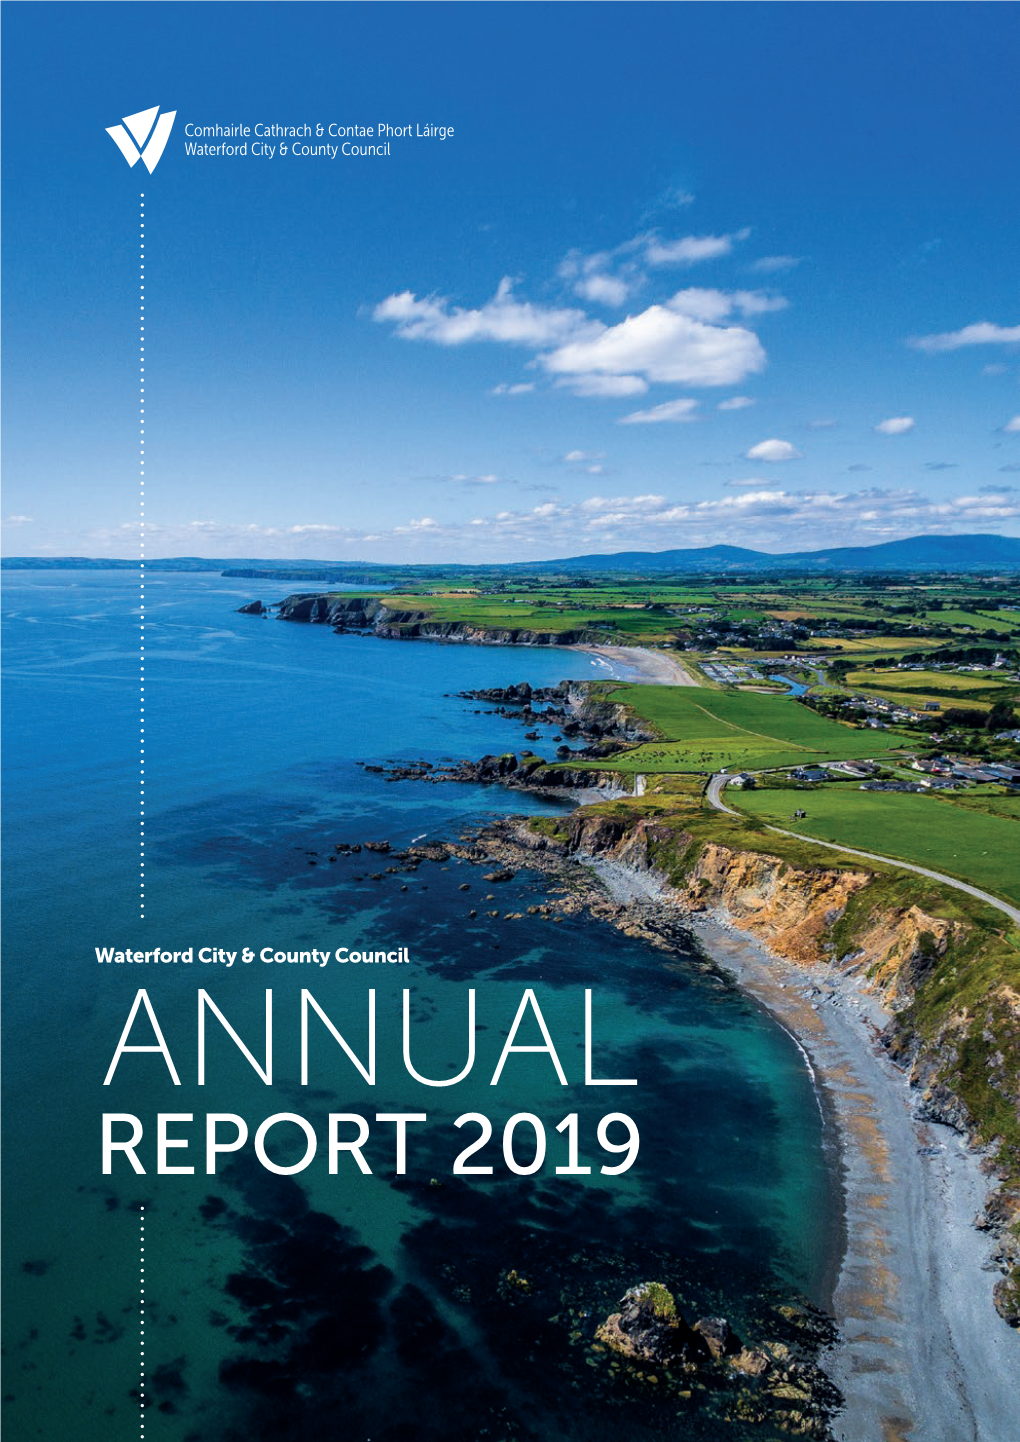 ANNUAL REPORT 2019 Strategic Policy 5 Committees 4 SPC 15Th 21St Meetings Feb Mar Were Held 18Th 5Th Apr Dec Invested in in 2019 €2.65M Greenway